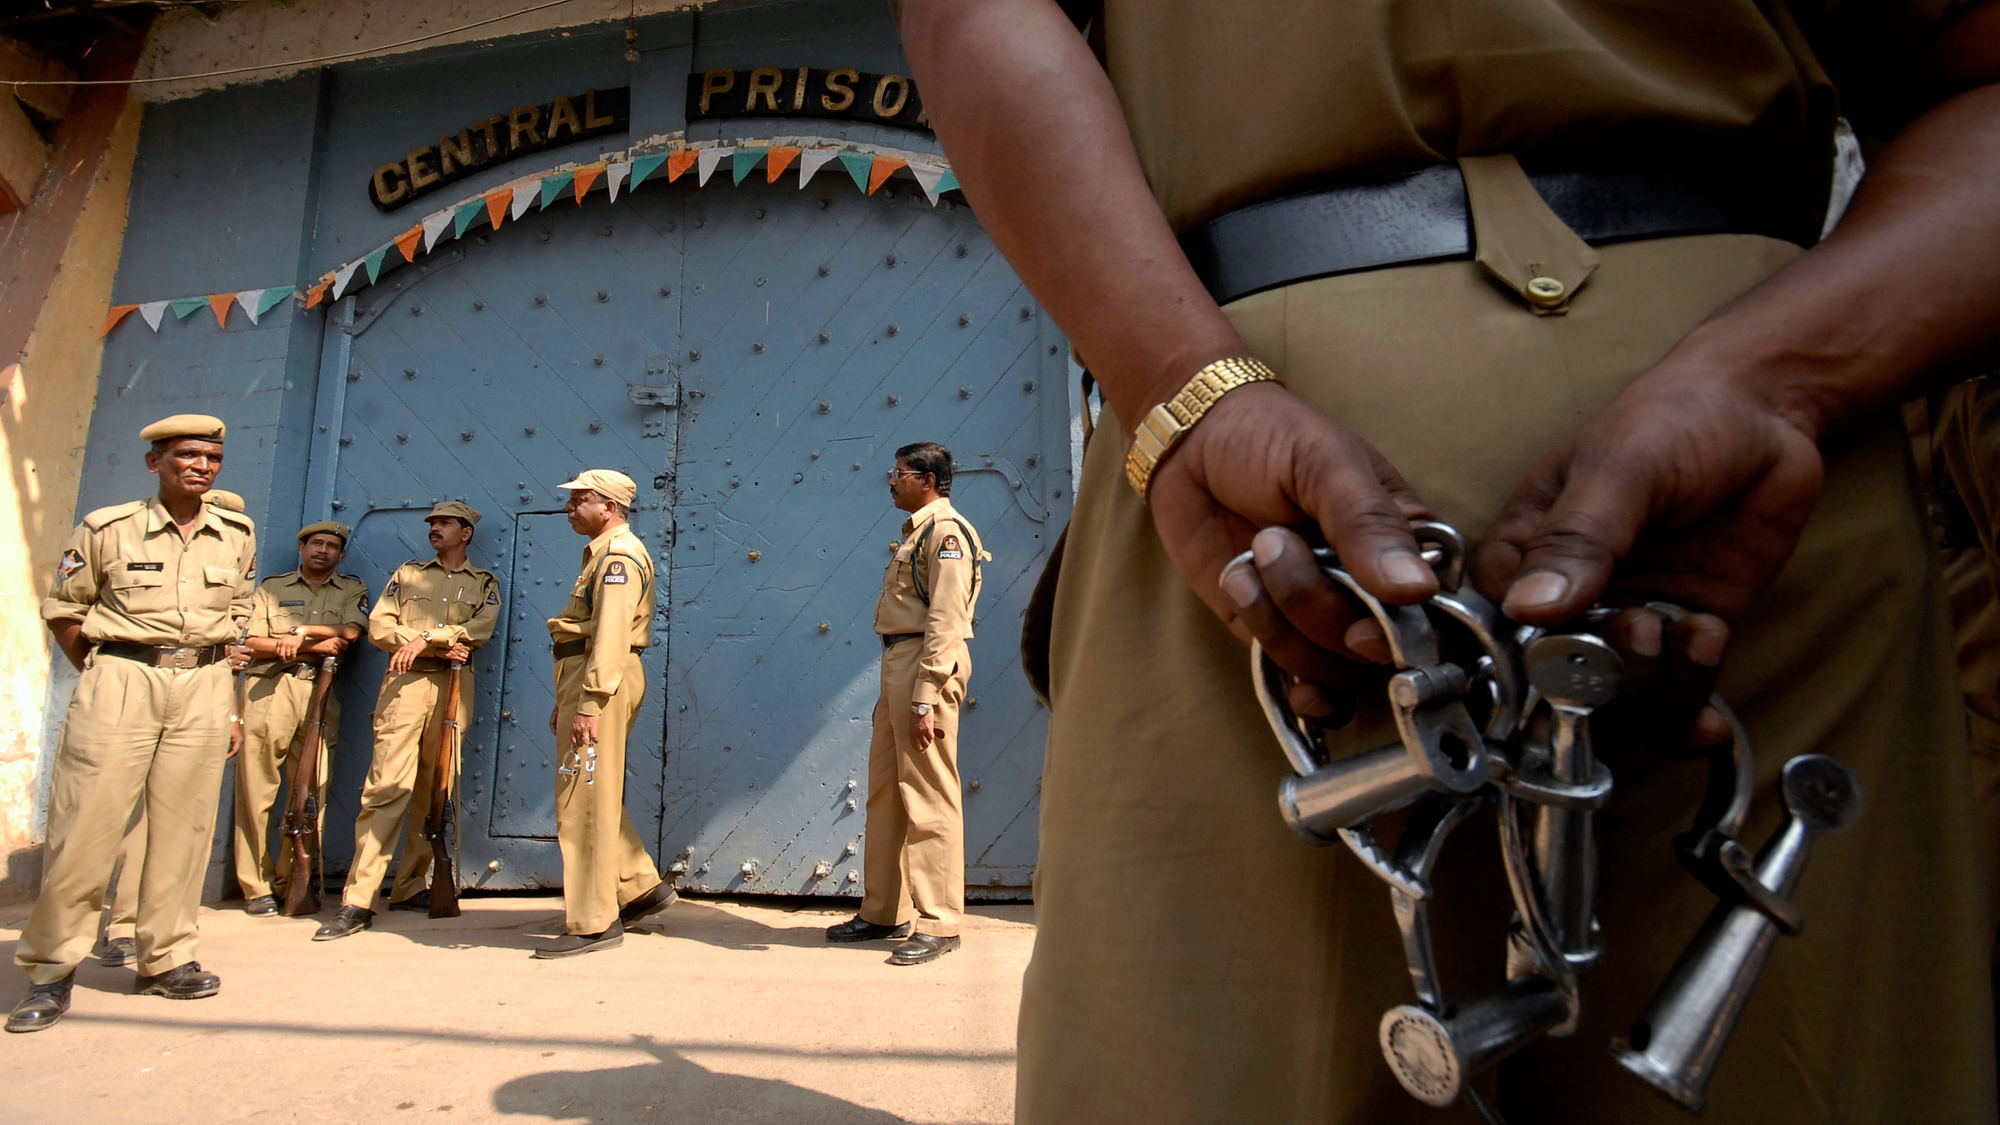 Representative image of a scene outside a jail in India.&nbsp;